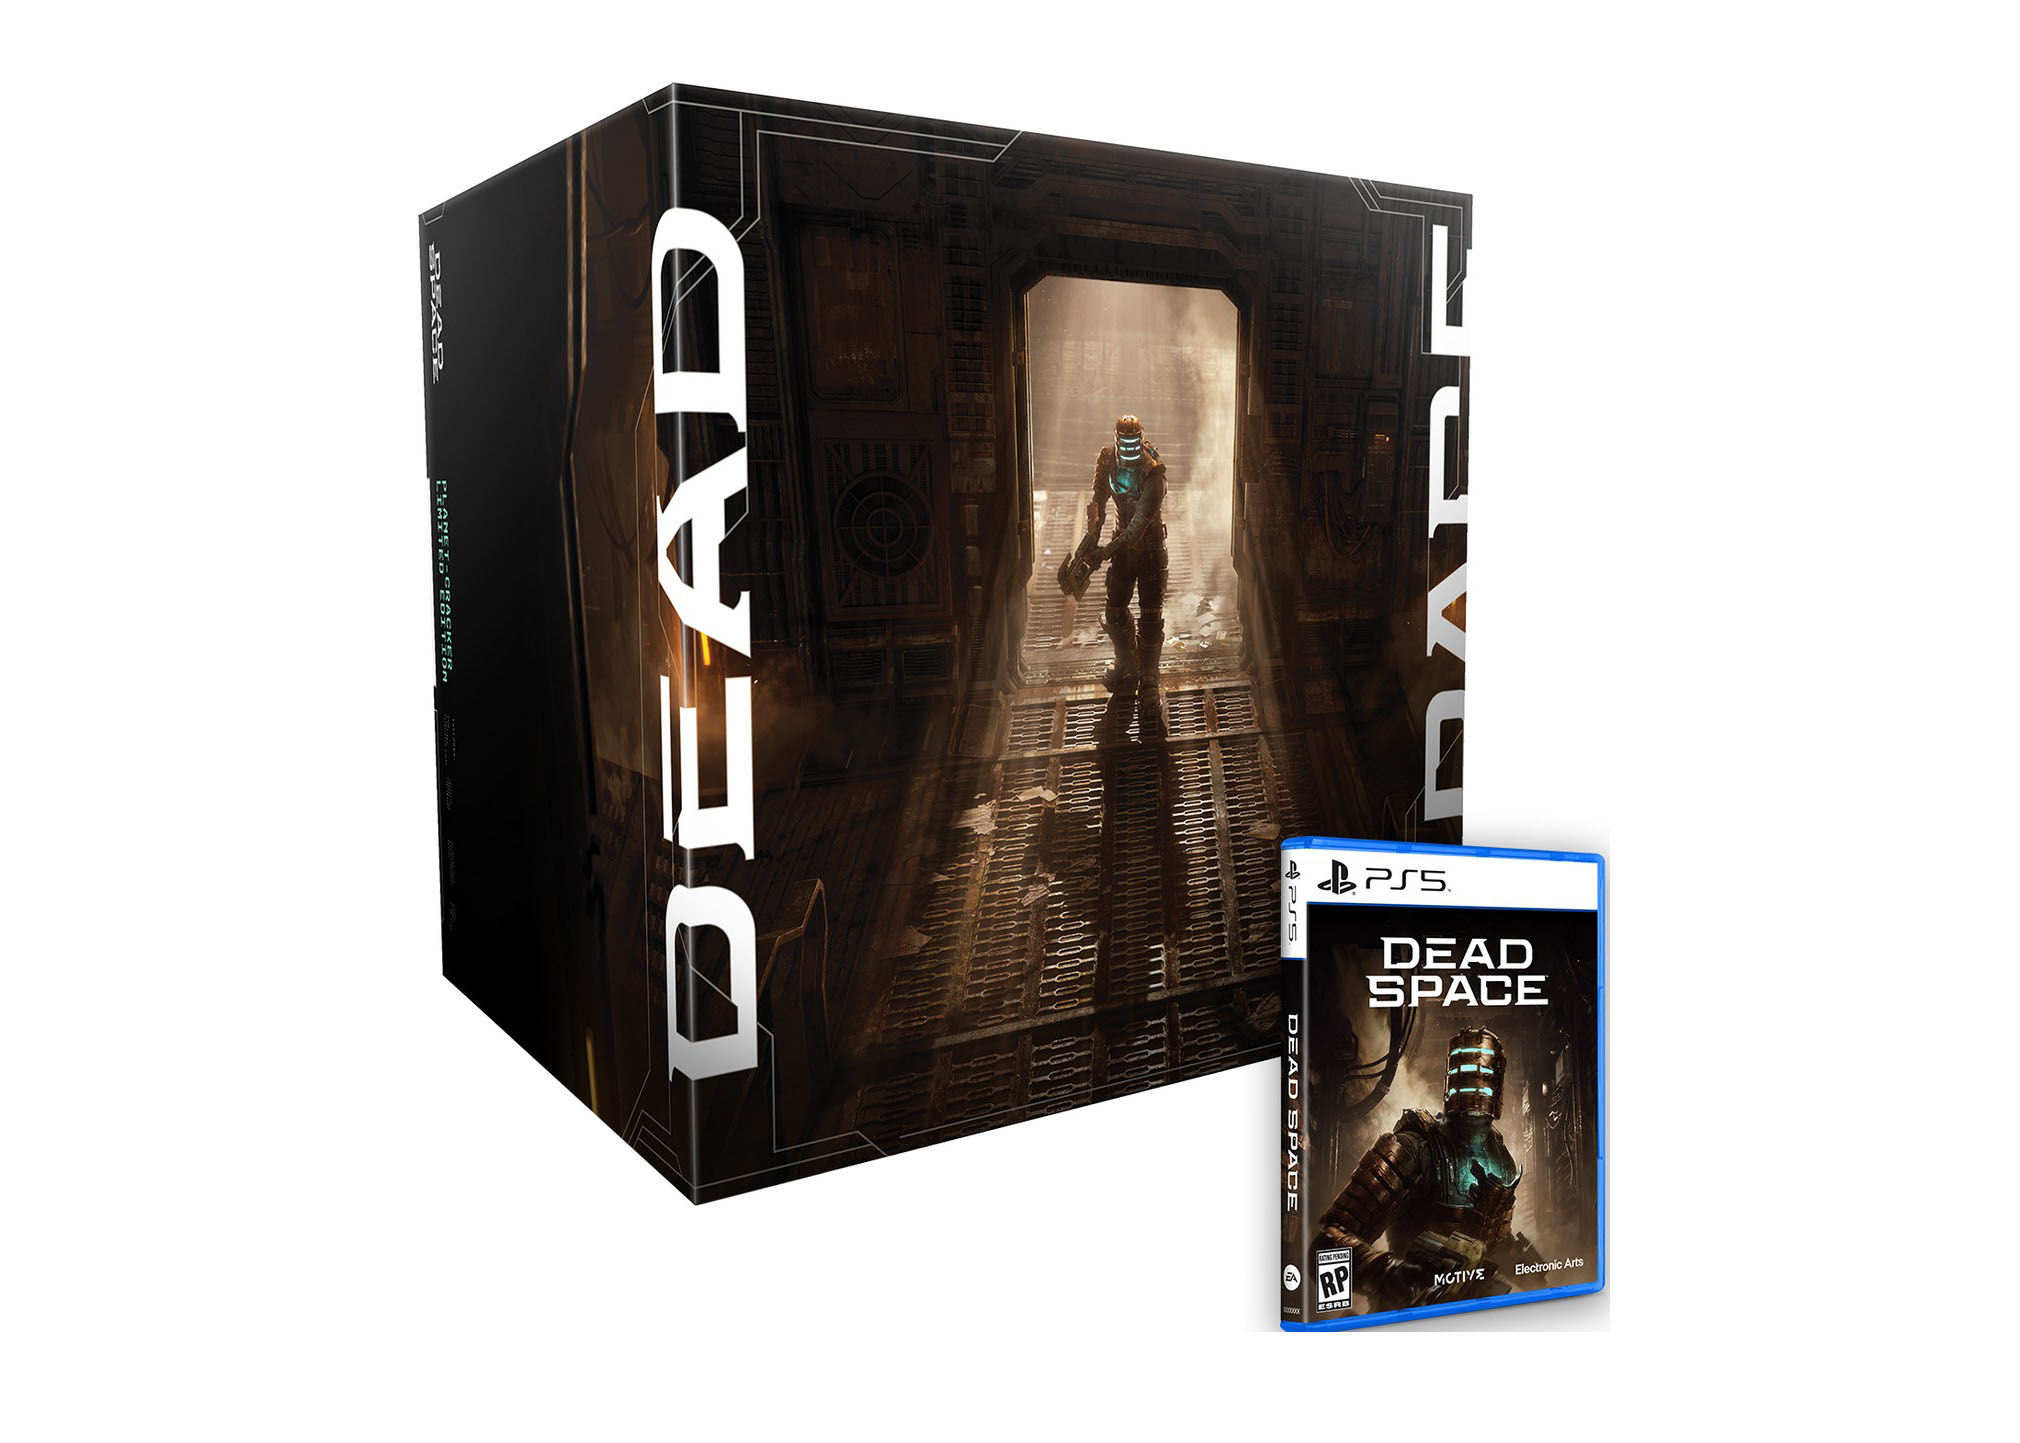 EA Sports PS5 Dead Space Collector's Edition Vidoe Game